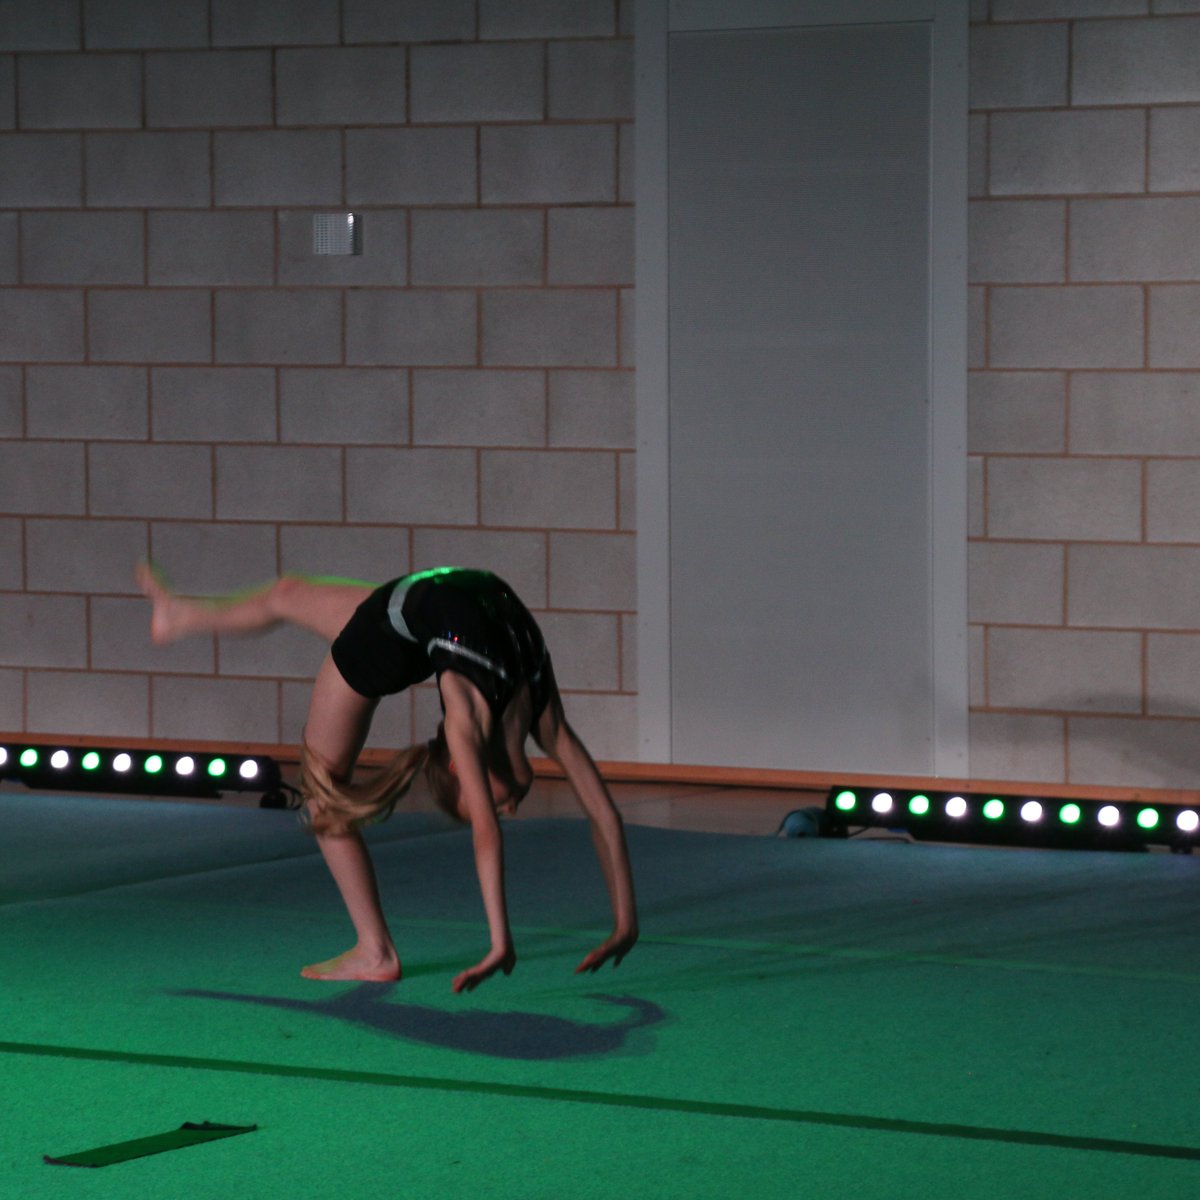 A spectacular showcase of strength and agility from our gymnasts last night. #commitment #creativity